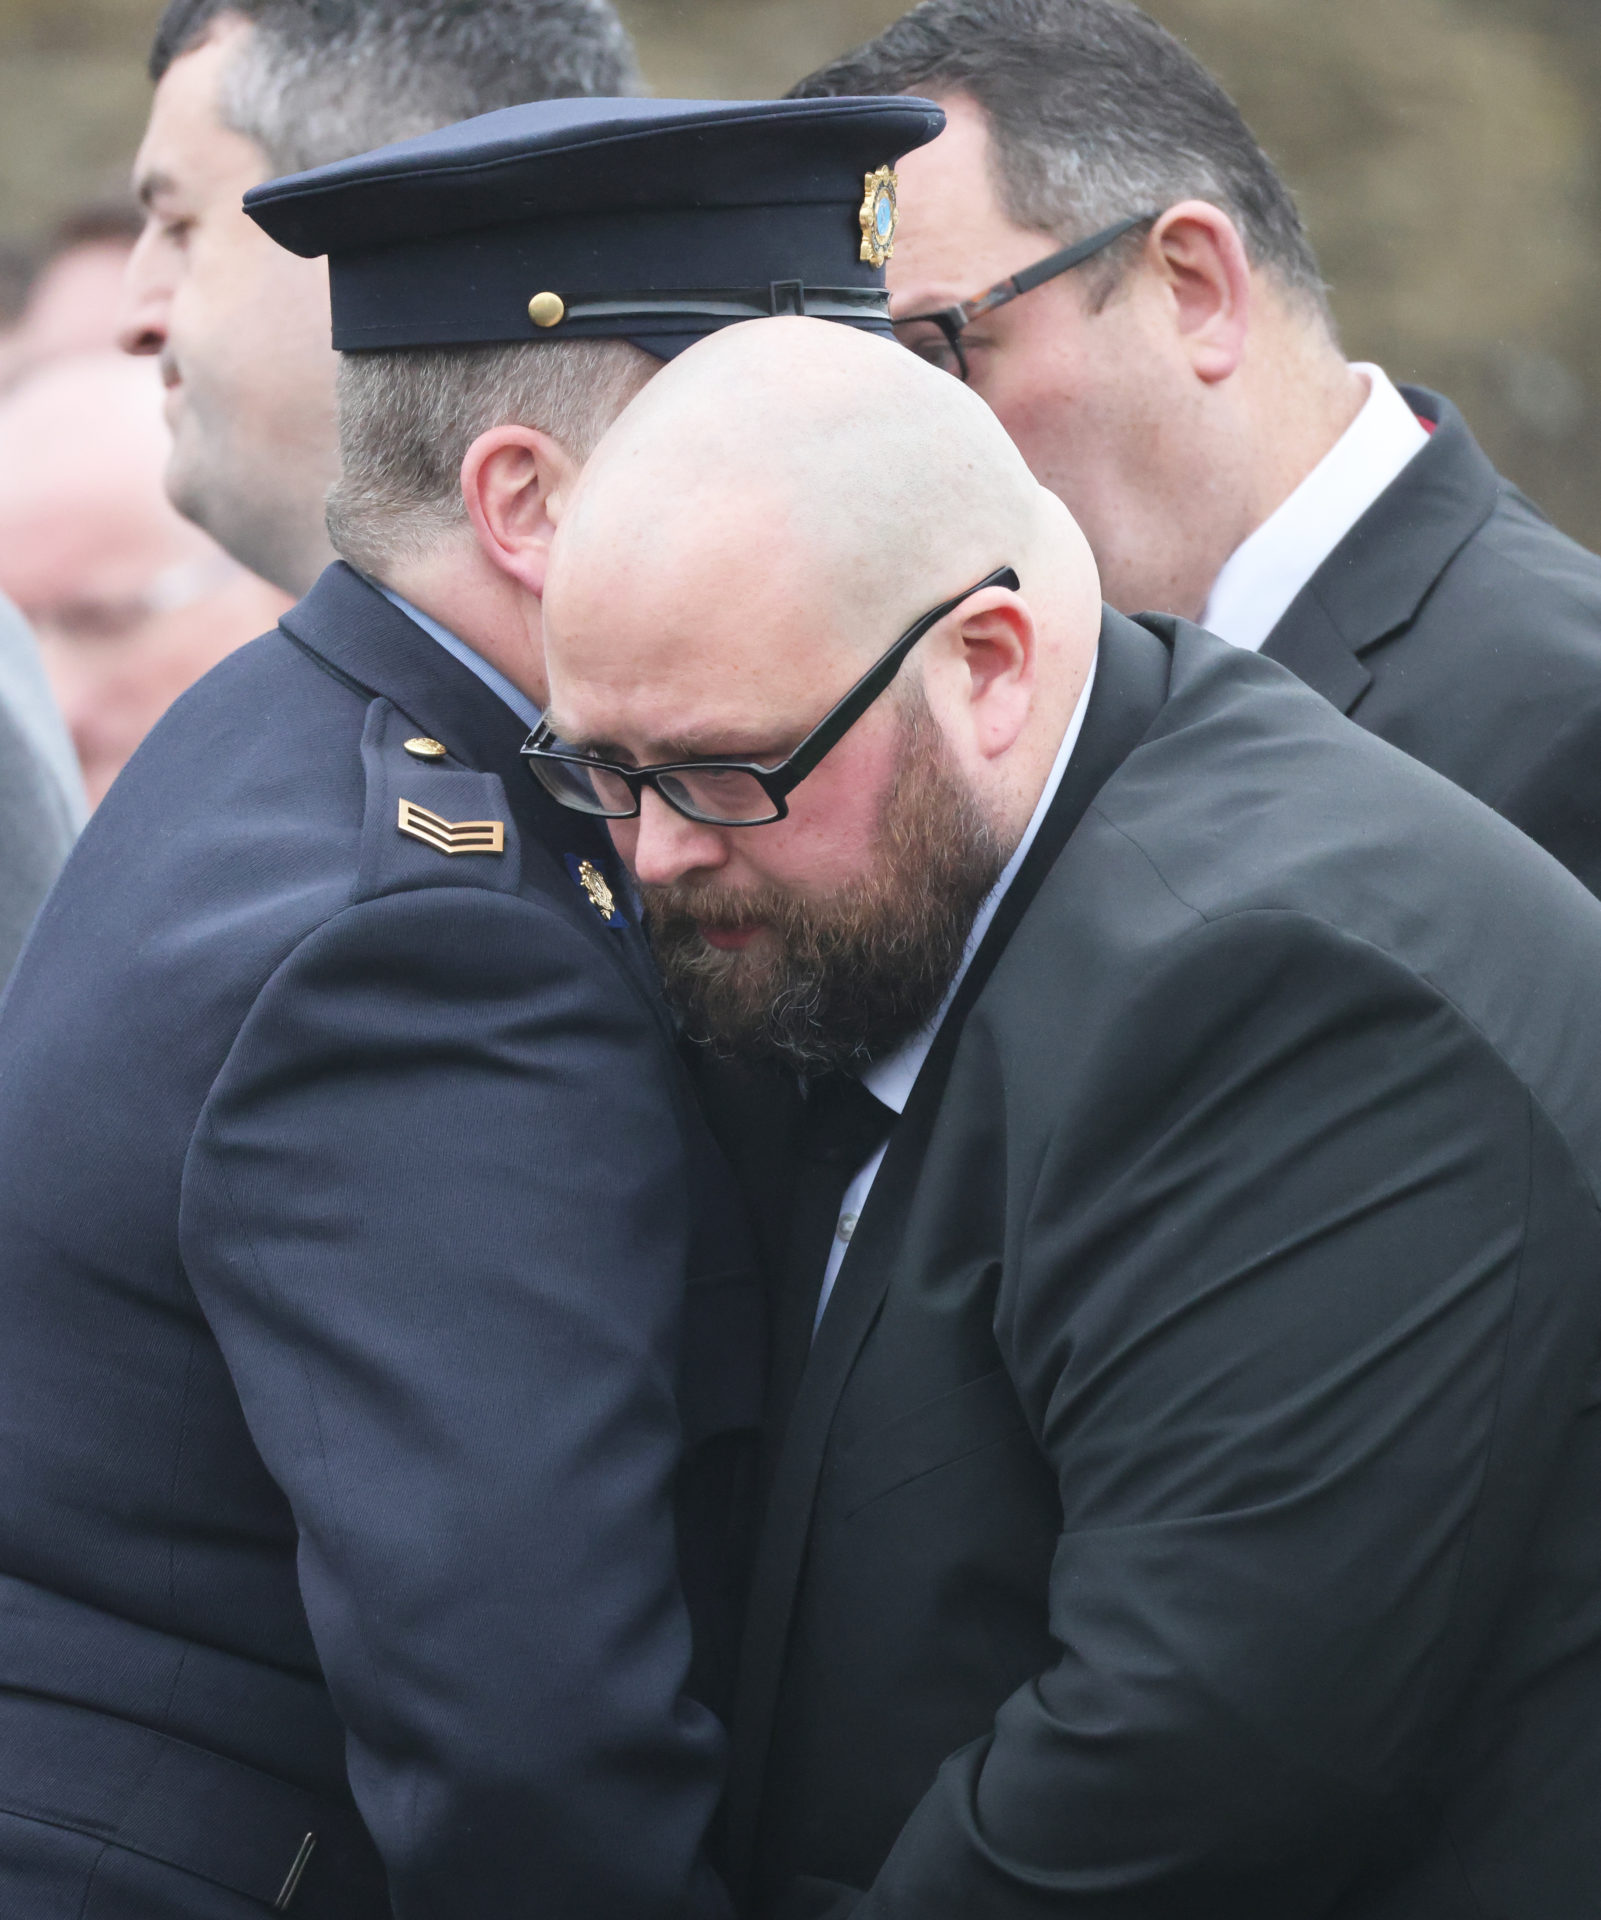 James Healy is comforted by a Garda at the funeral of his son Matthew Healy in the Church of the Immaculate Conception in Cork, 14-2-24.